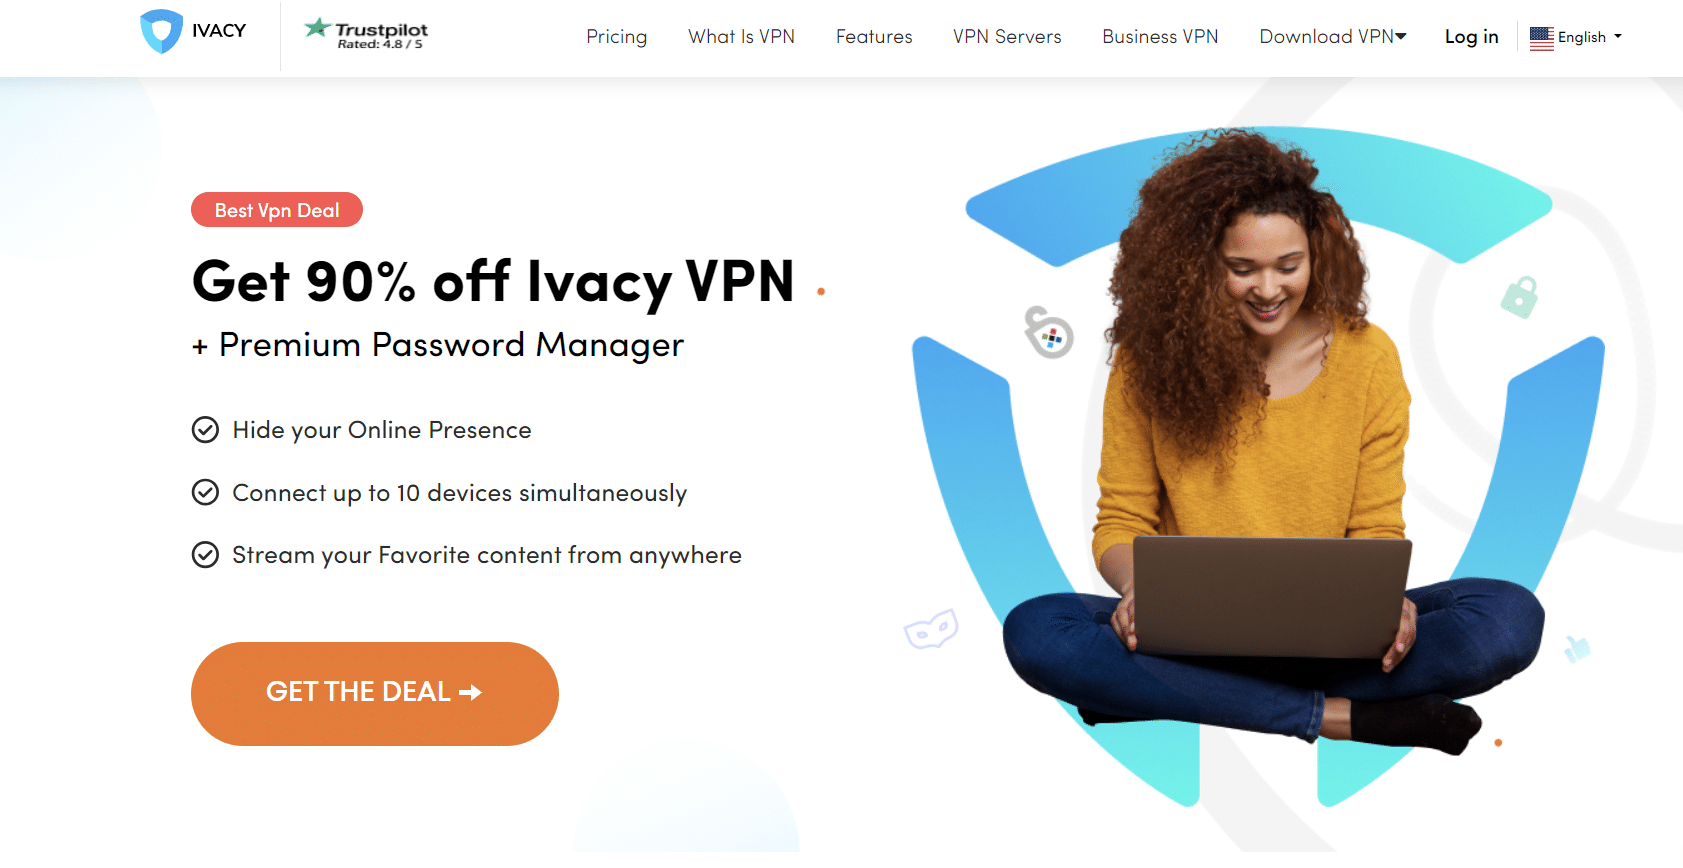 Ivacy VPN: A Story of Continuing Dominance